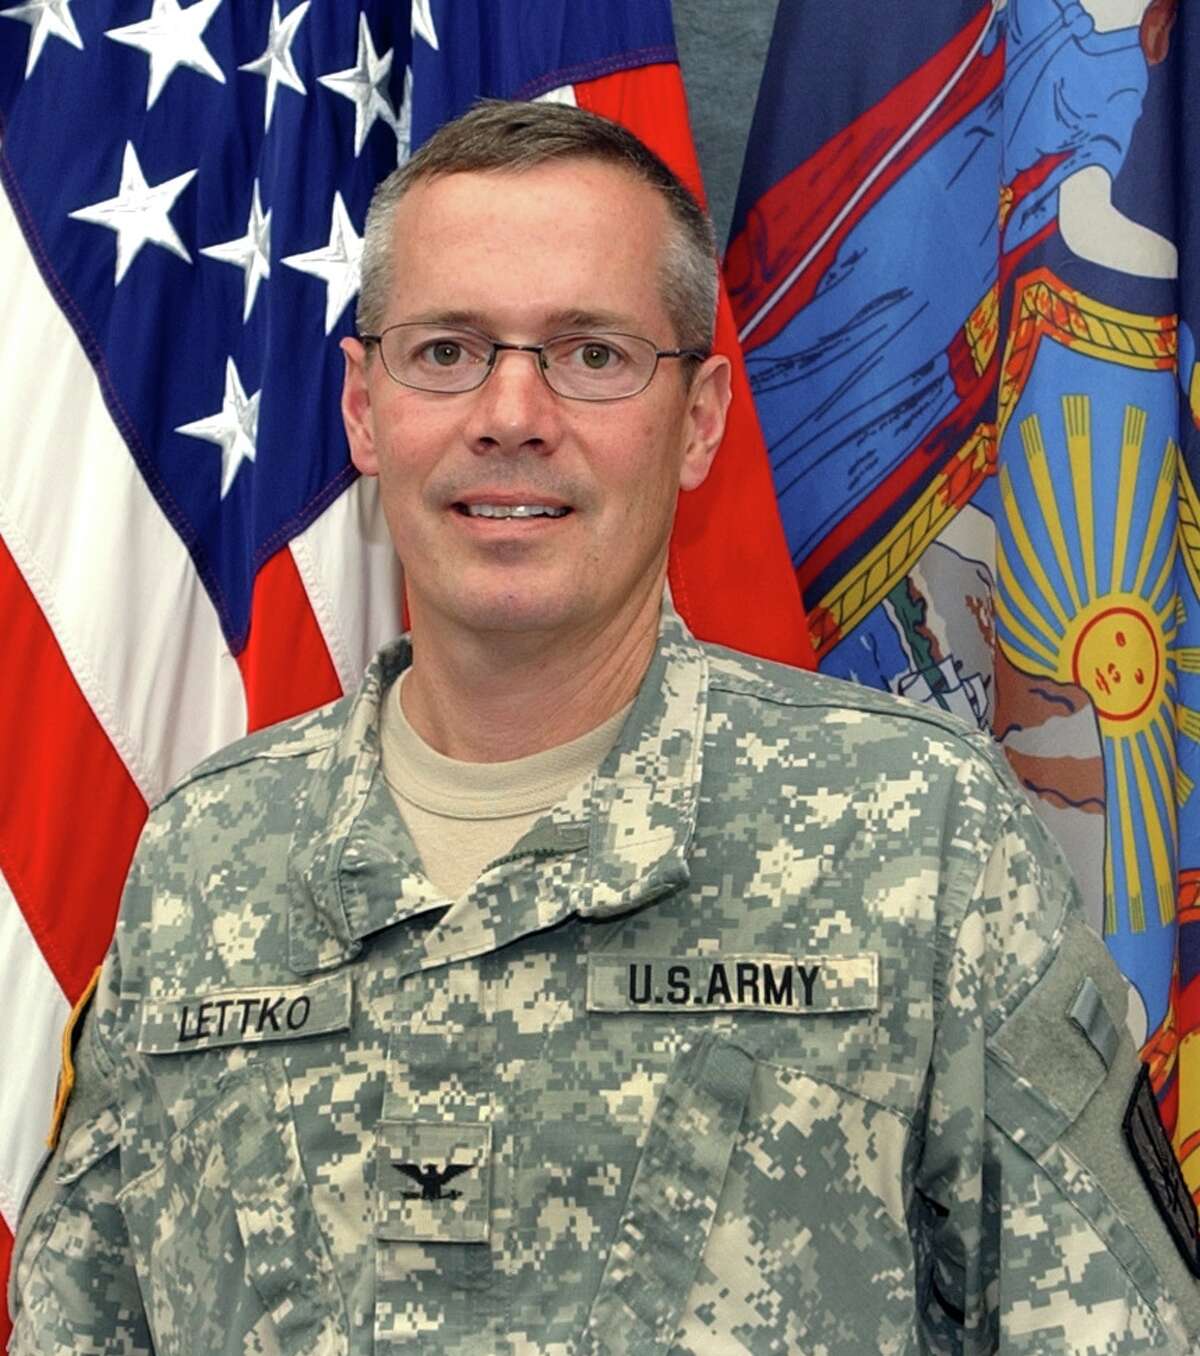 Col. James Lettko will be promoted To brigadier general in Troy on Friday. He becomes deputy commander of Joint Task Force Guantanamo next week. (photo provided by New York Army National Guard).